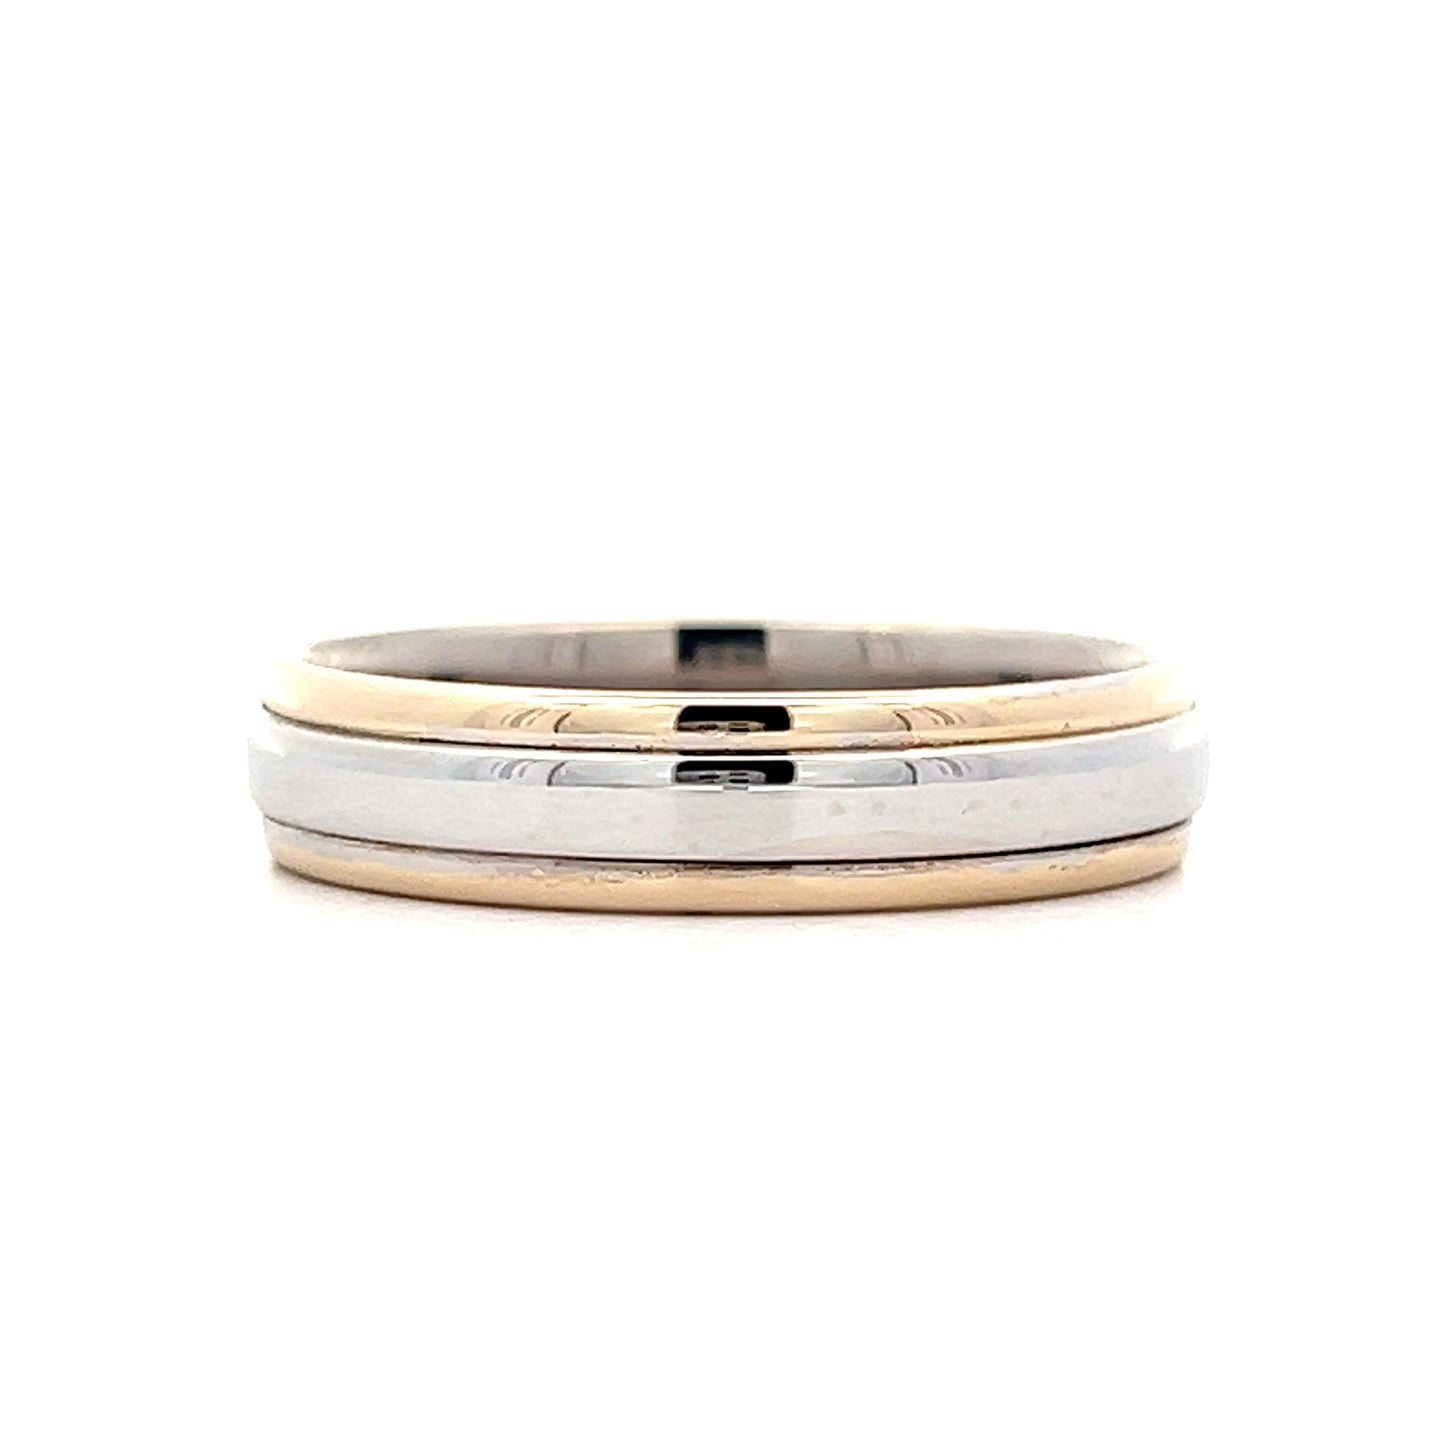 Men's Two-Toned Wedding Band in 14k White & Yellow Gold